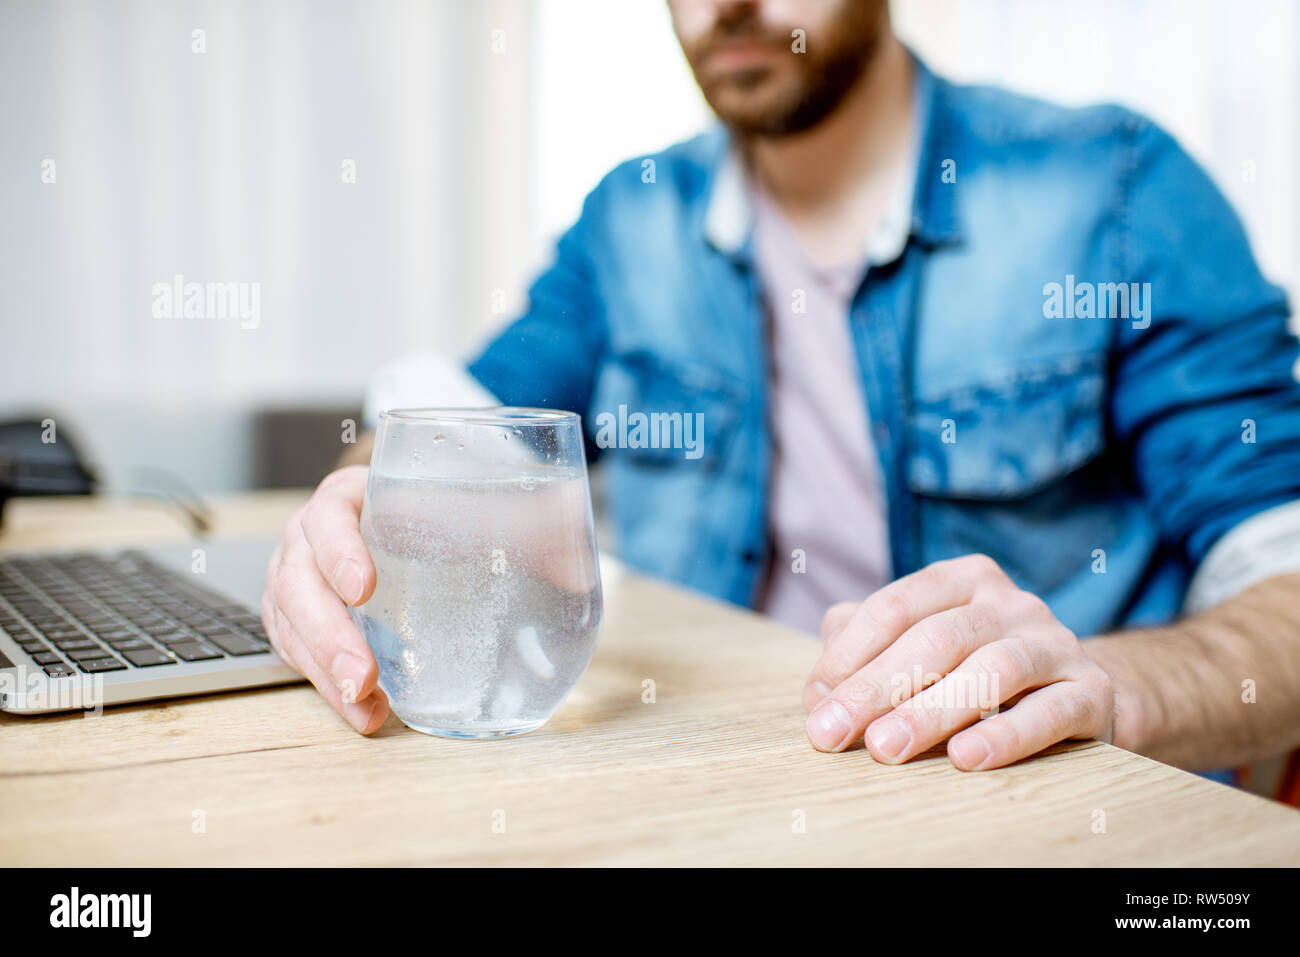 Man taking antipyretic or analgesic pills feeling bad while working on the laptop at home Stock Photo